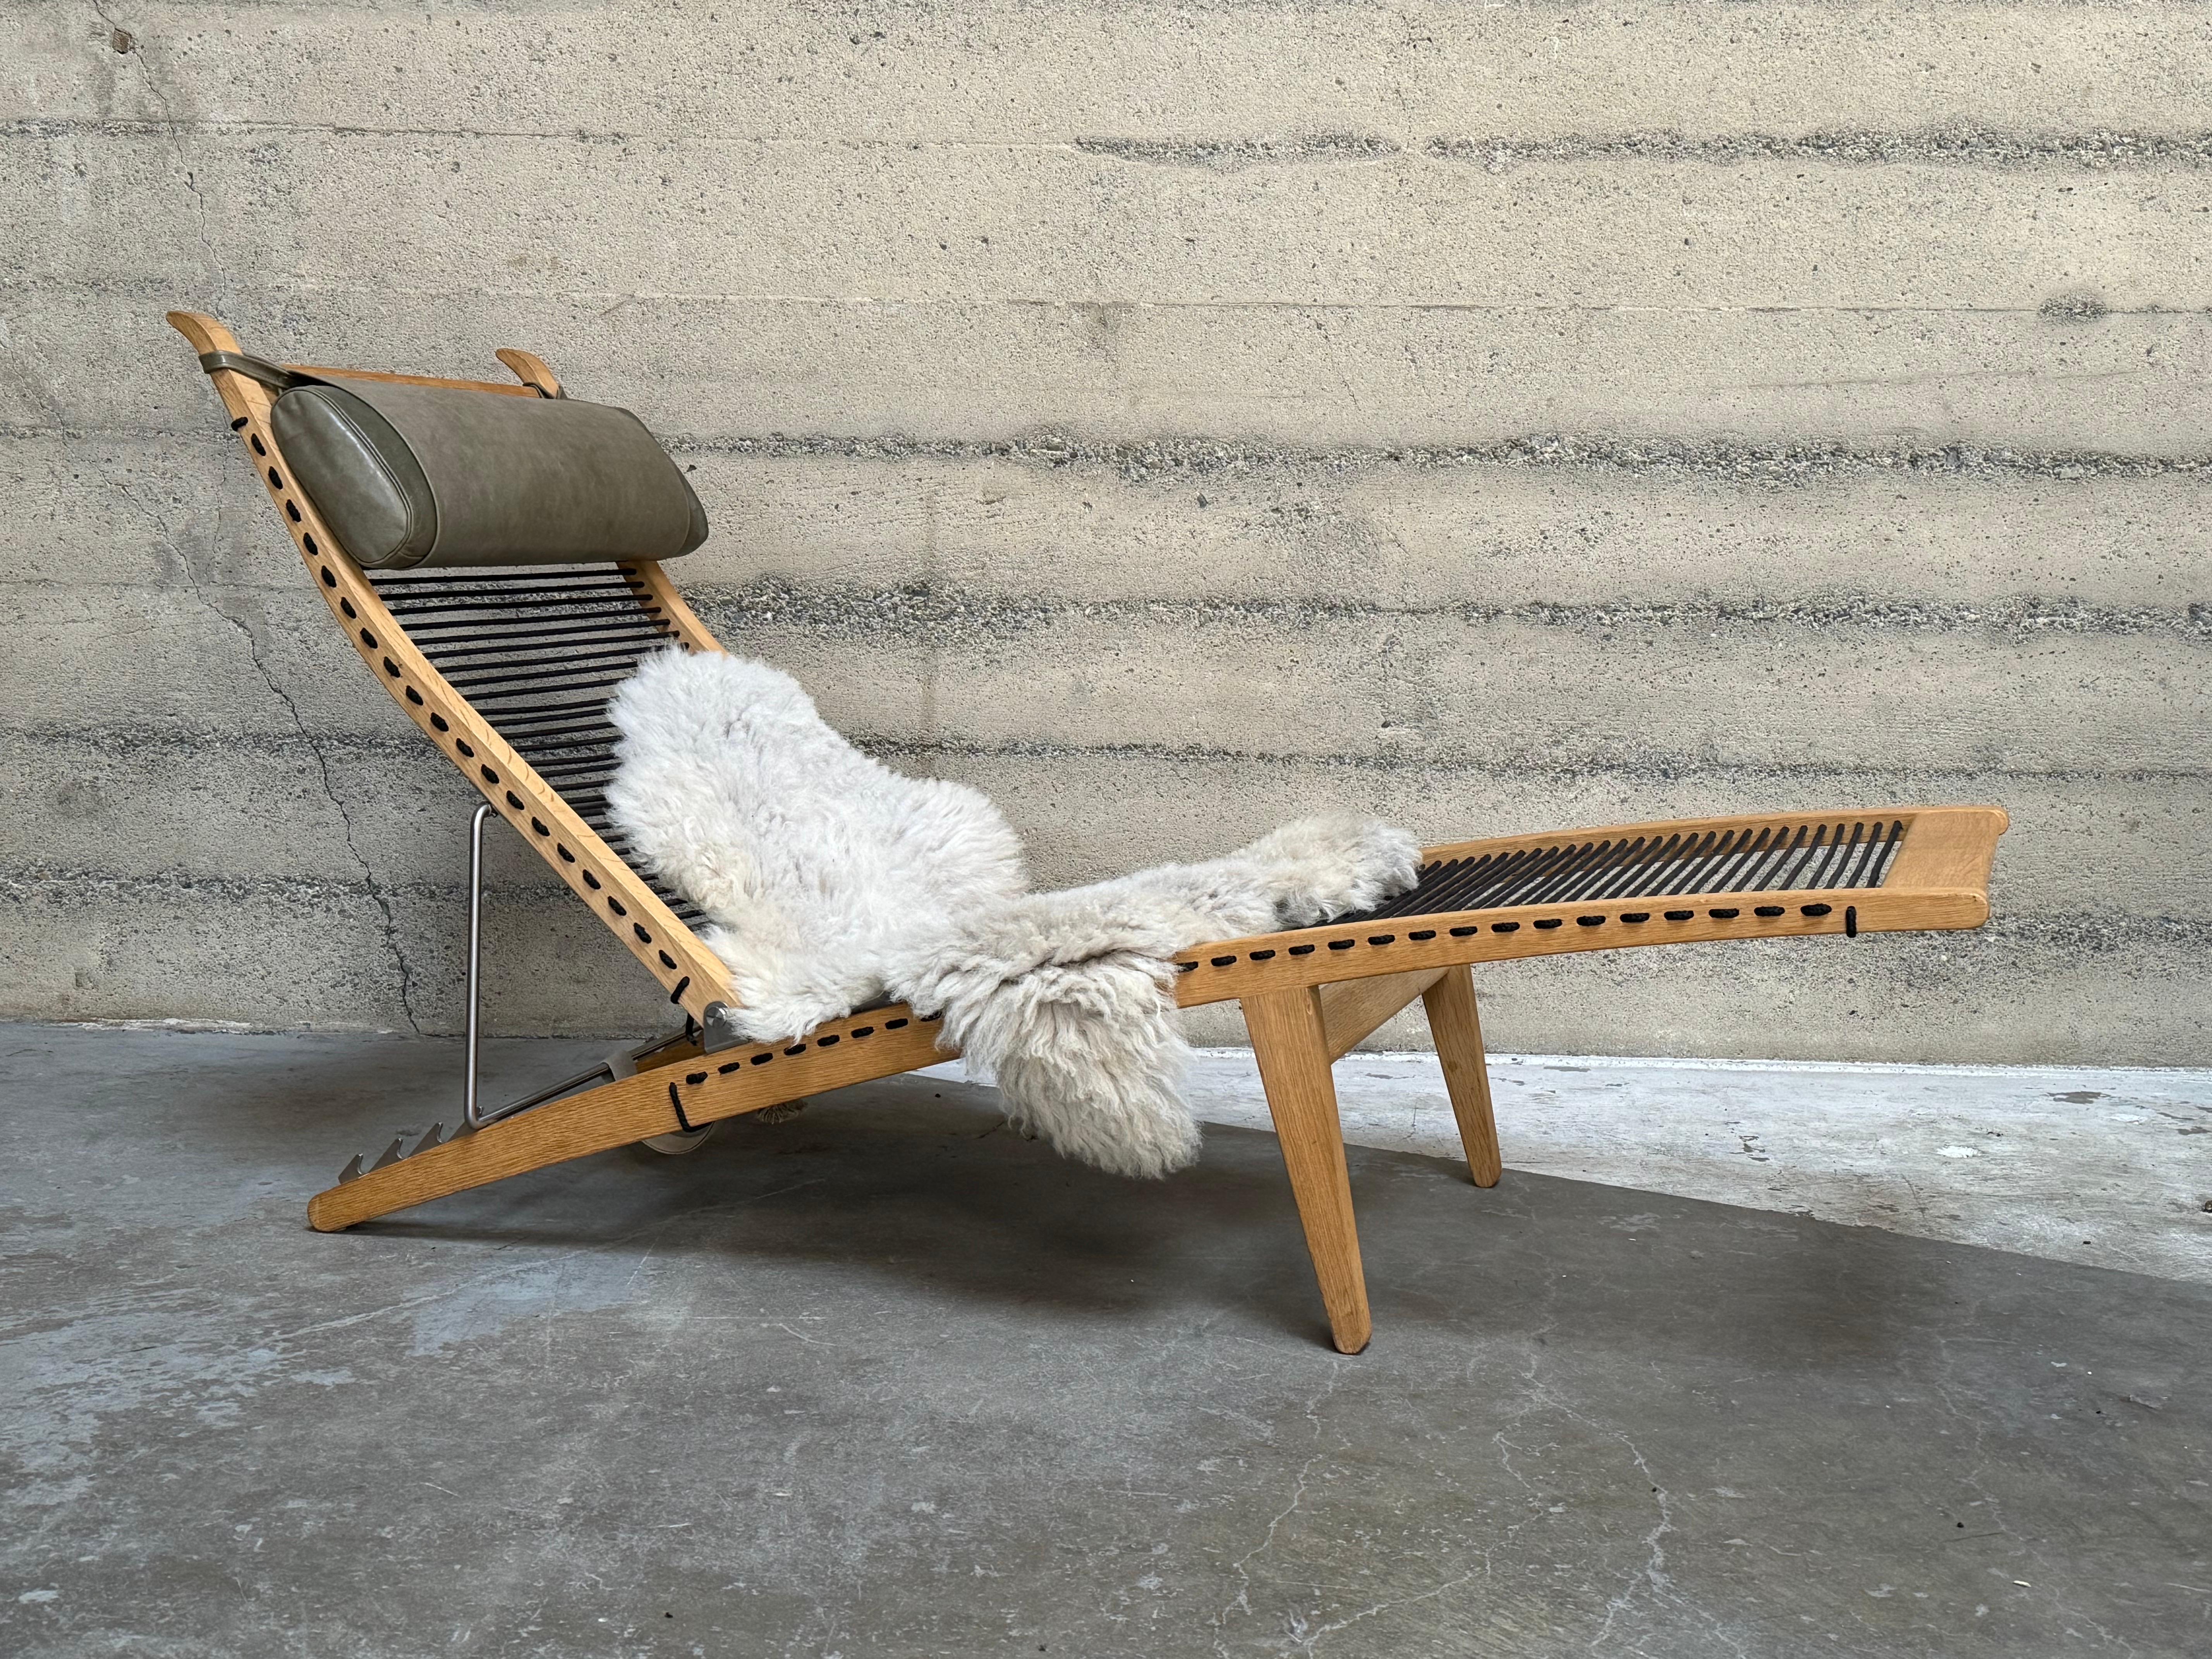 A classic deckchair designed by Hans J. Wegner in the 1950s, currently produced to-order by PP Møbler in Denmark. This example dates to the mid-2000s. 

The frame is constructed of solid white oak, the seat is woven in black cotton halyard rope and